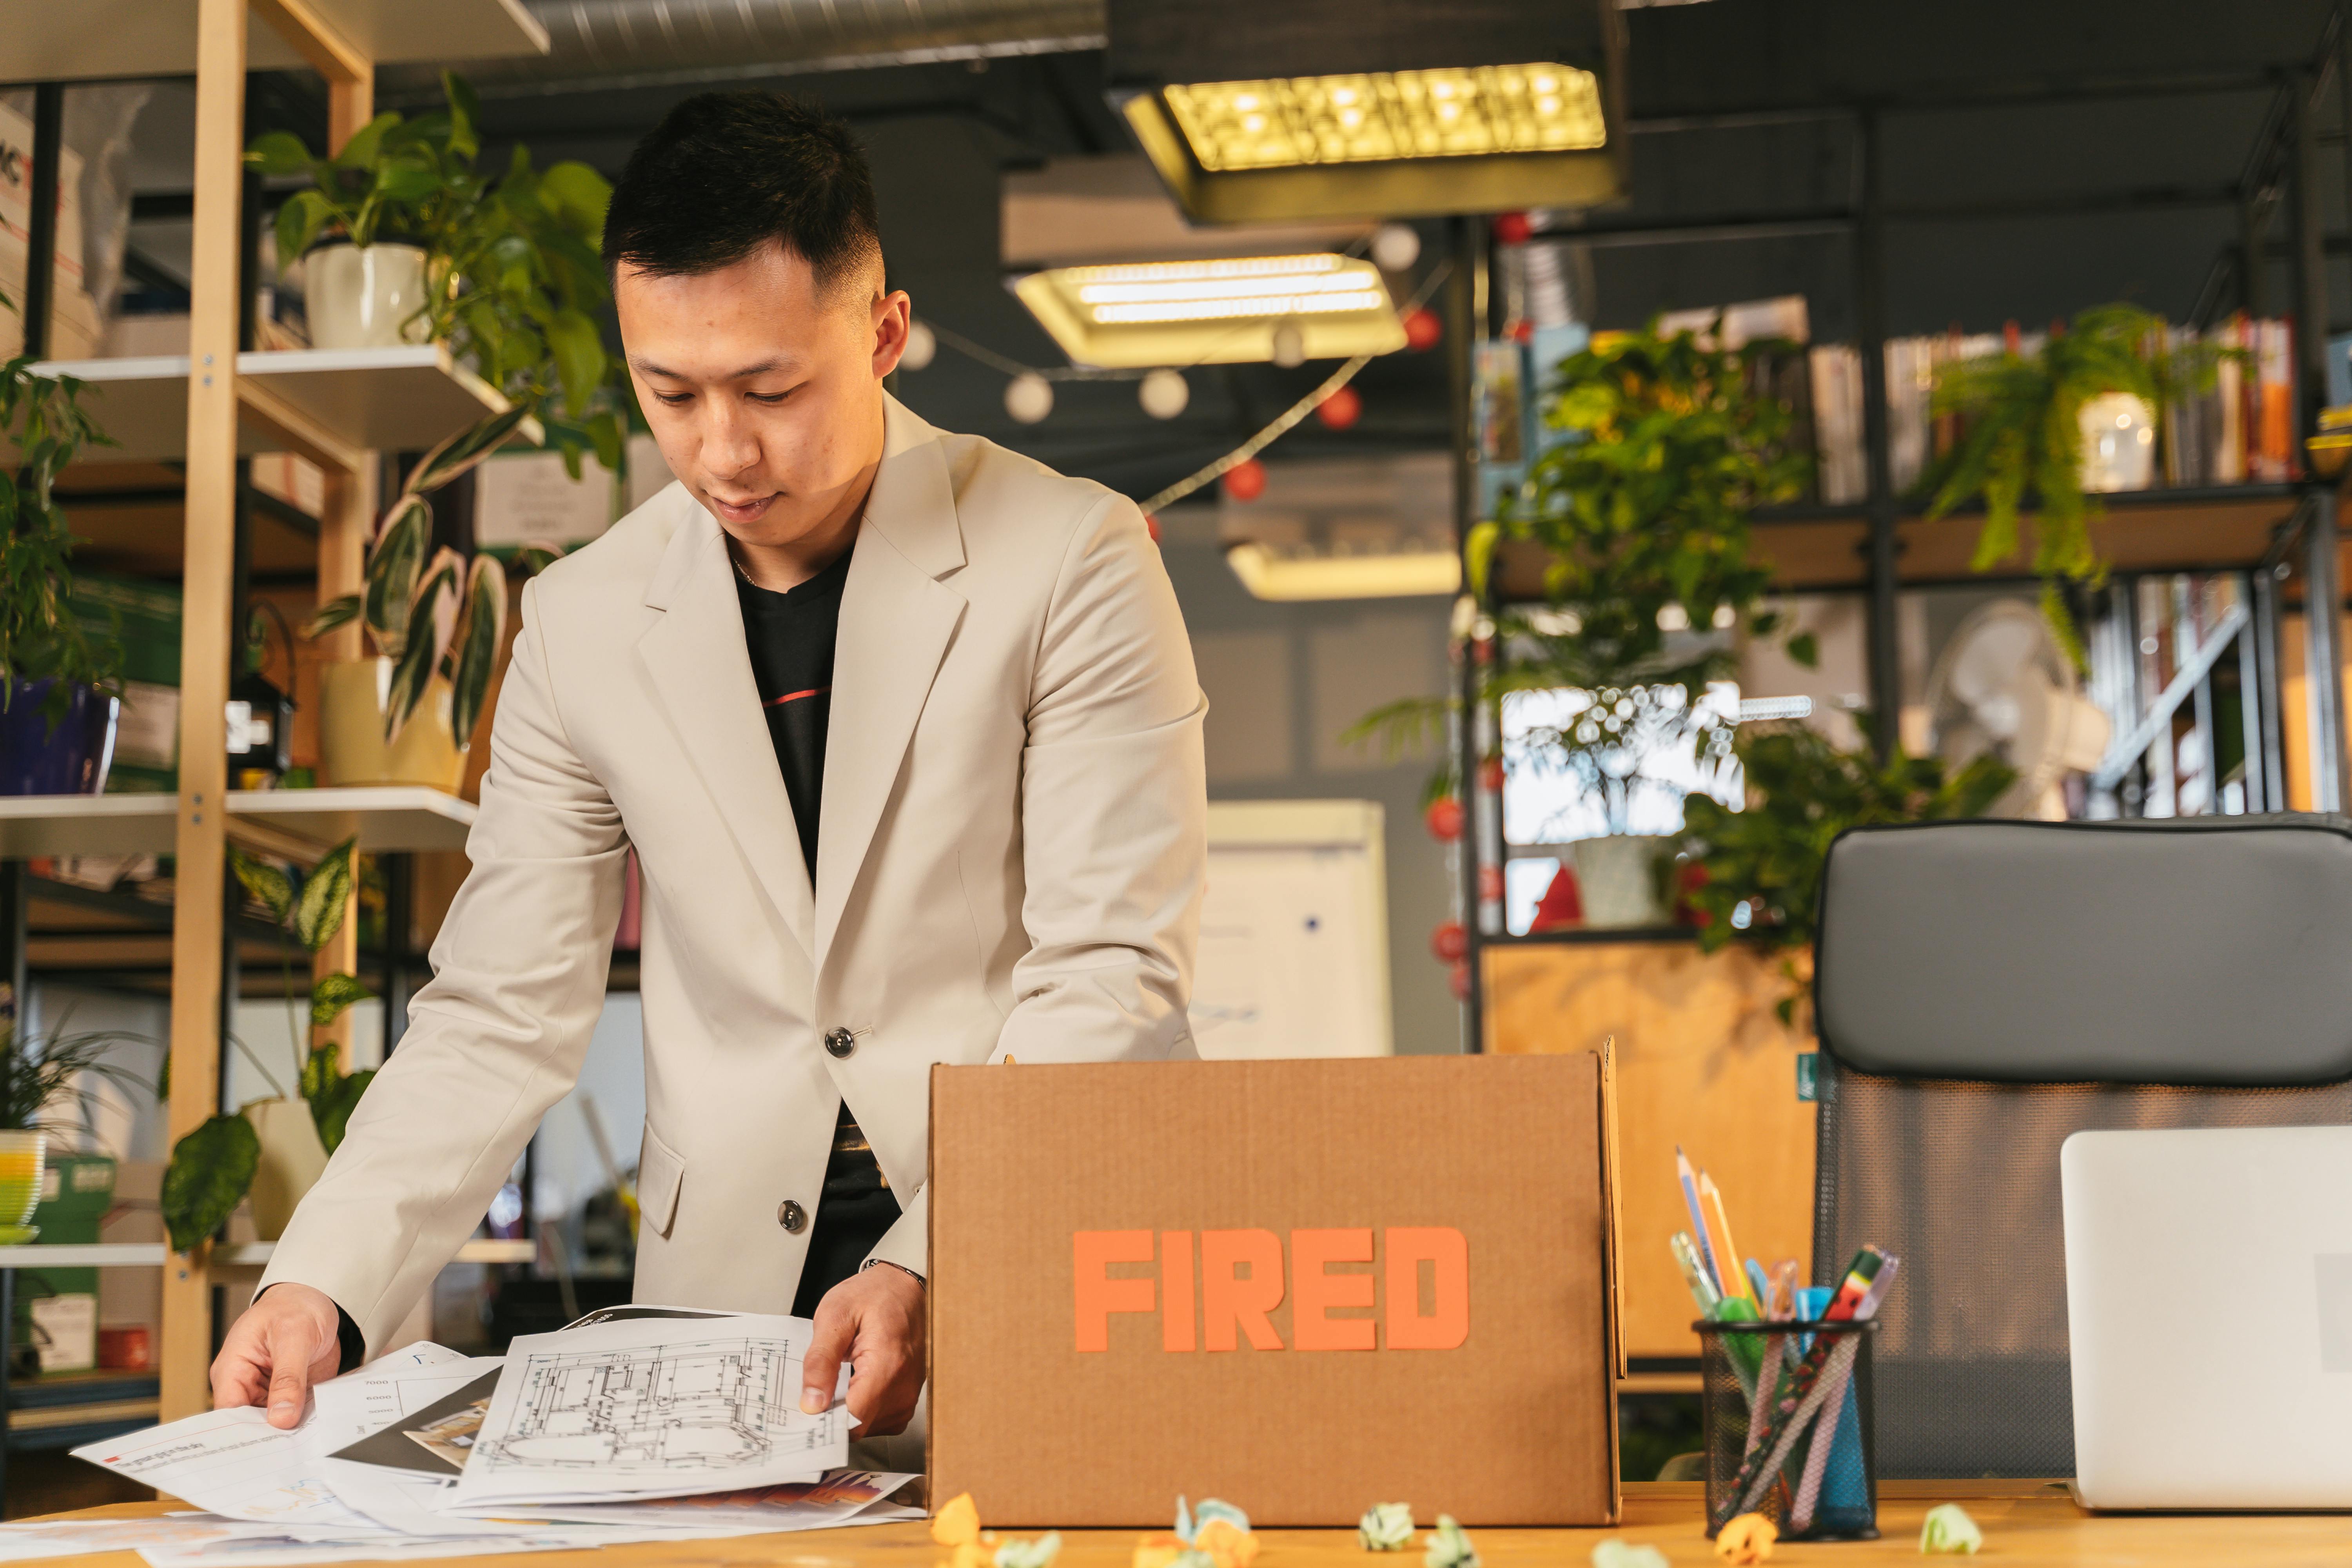 A man fired from his job packing his things | Source: Pexels